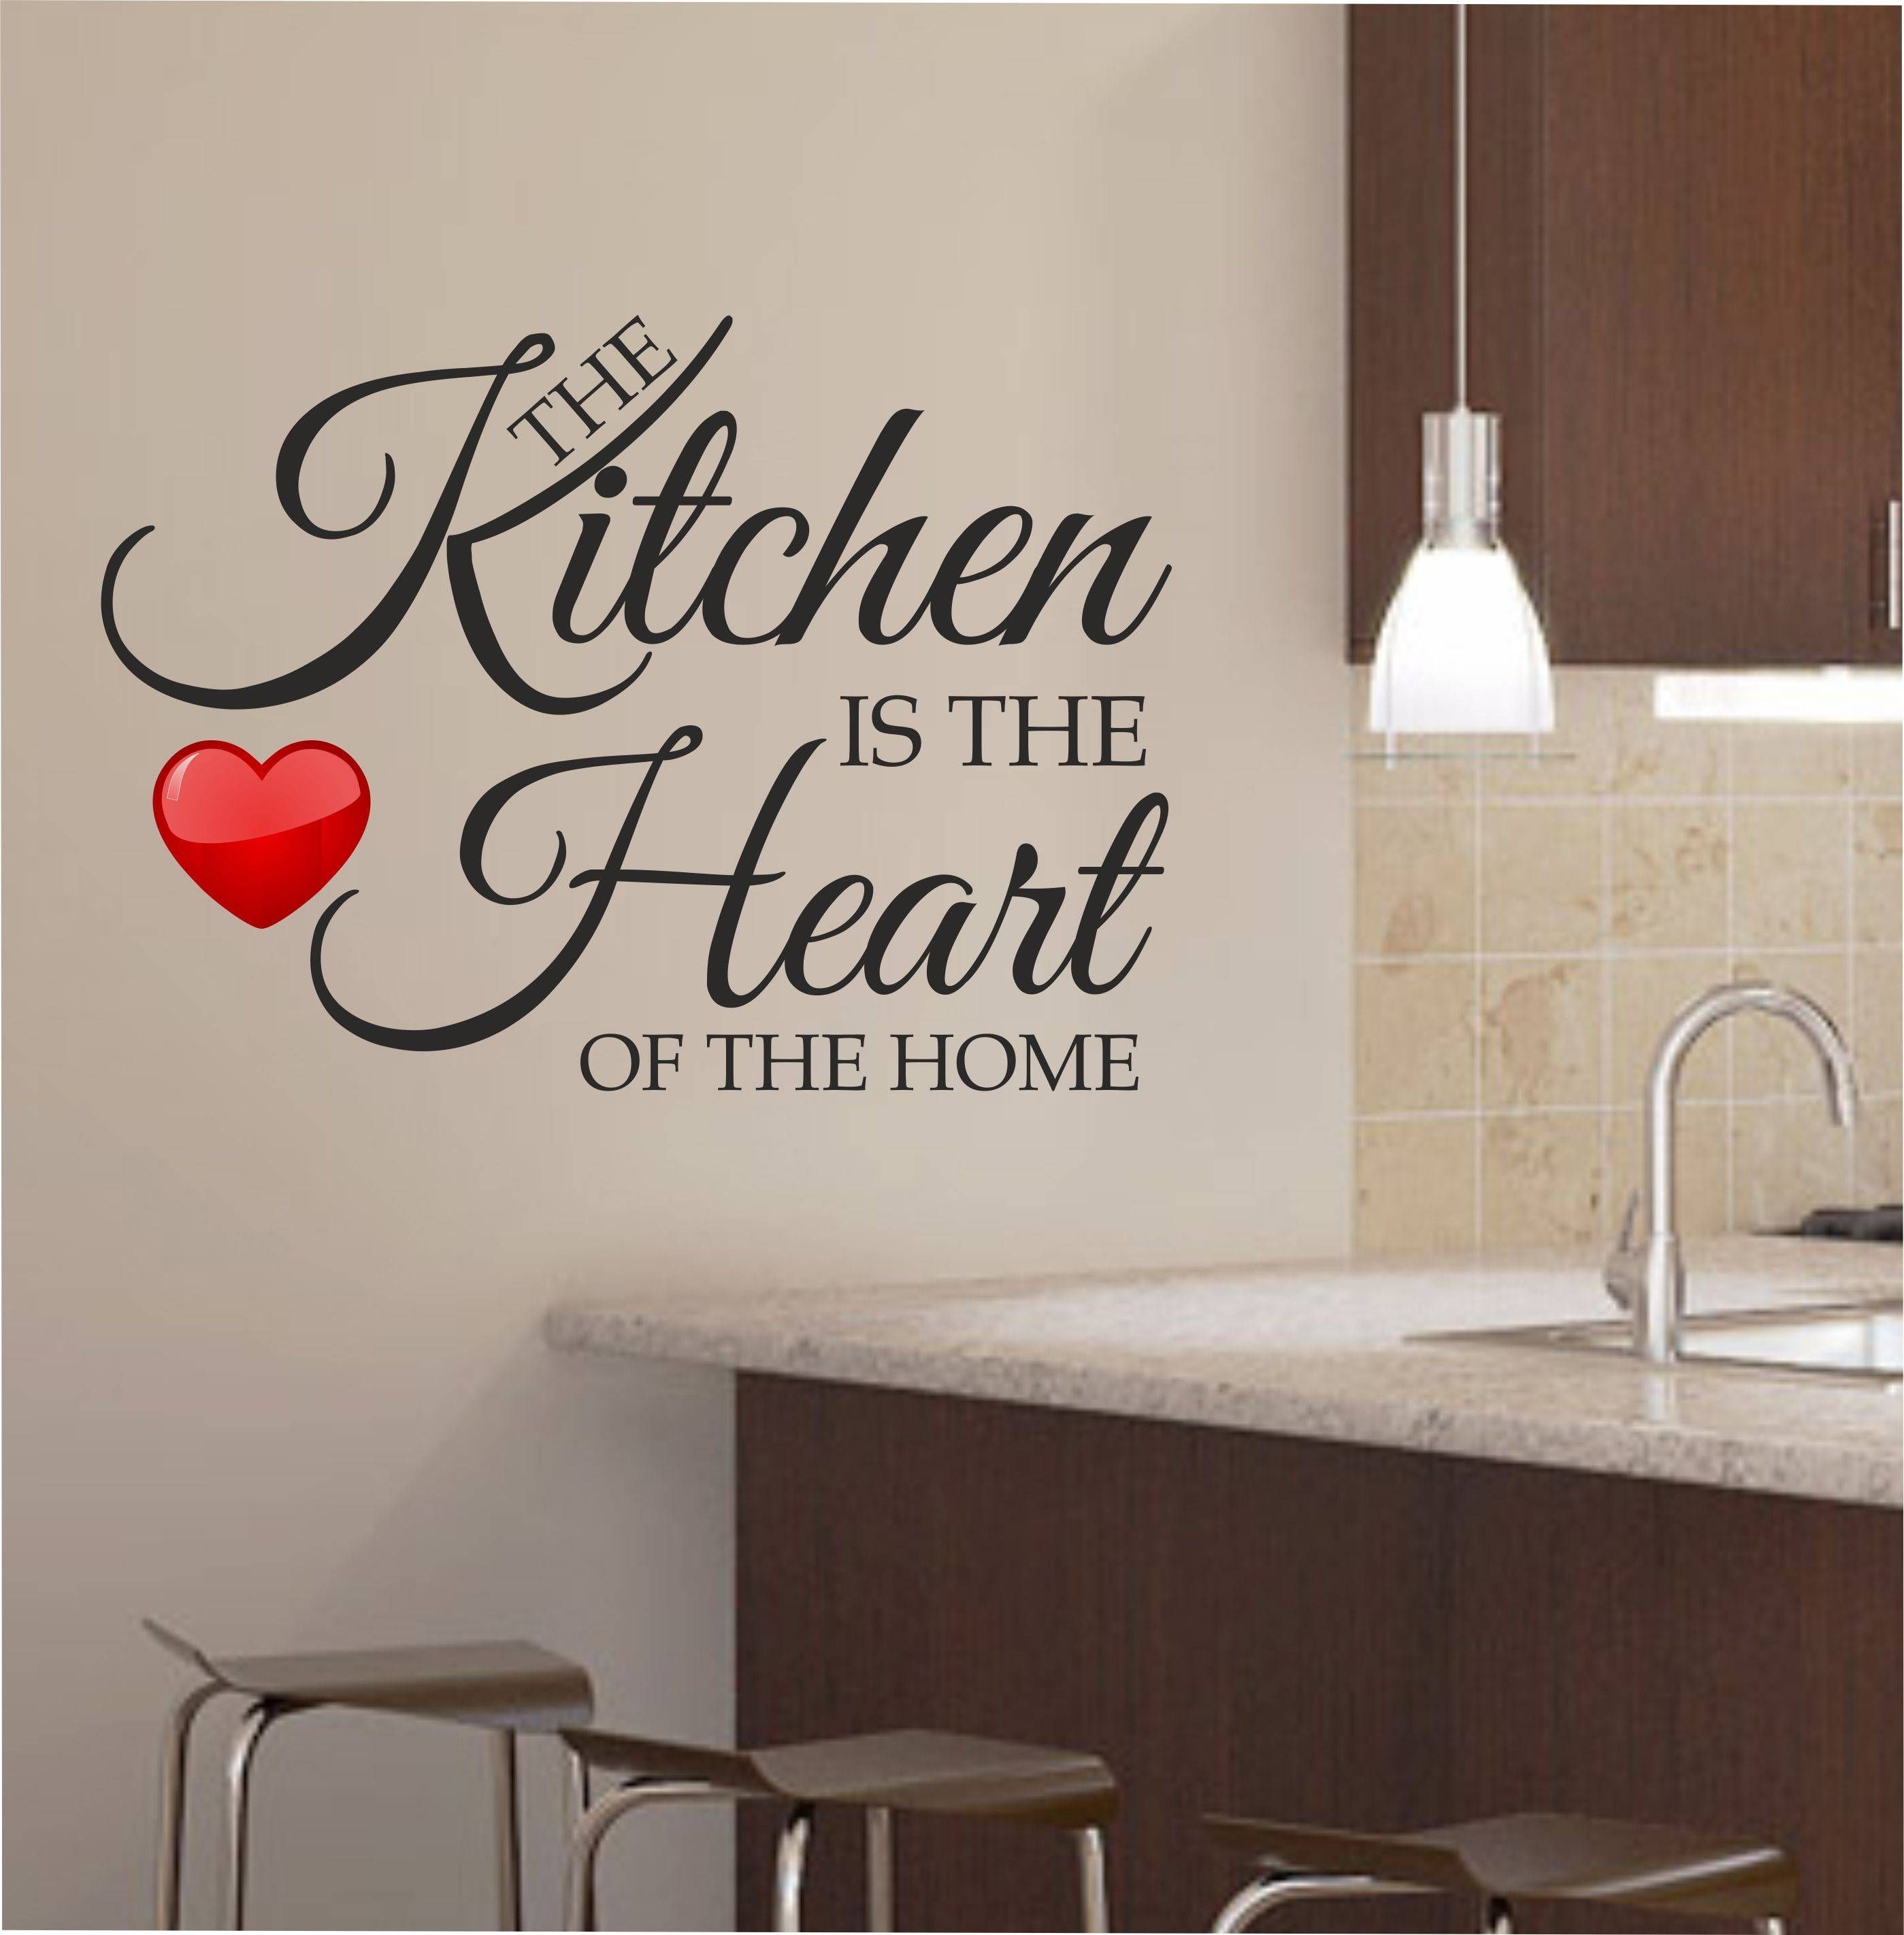 Decorate Your Kitchen With Appealing Kitchen Wall Art – Designinyou Intended For 2017 Kitchen Wall Art (View 8 of 25)